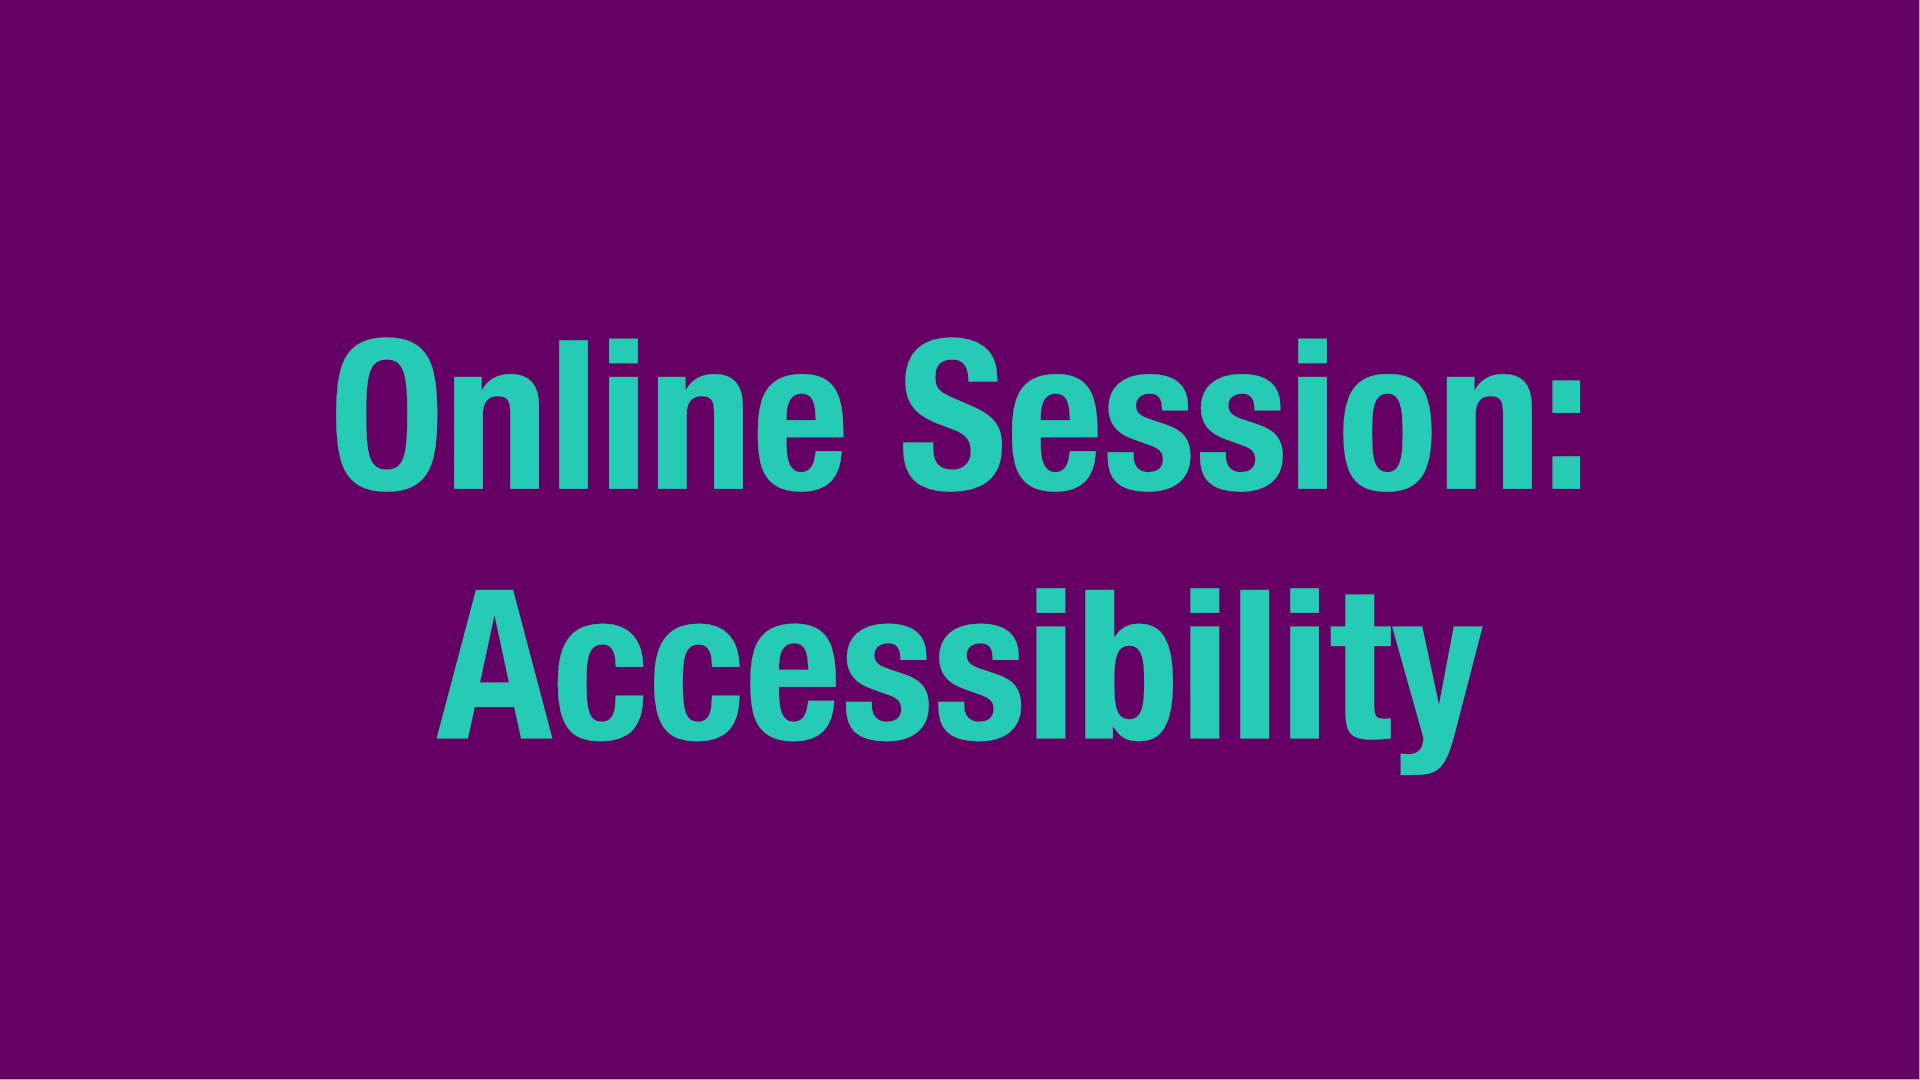 Online Session Accessibility